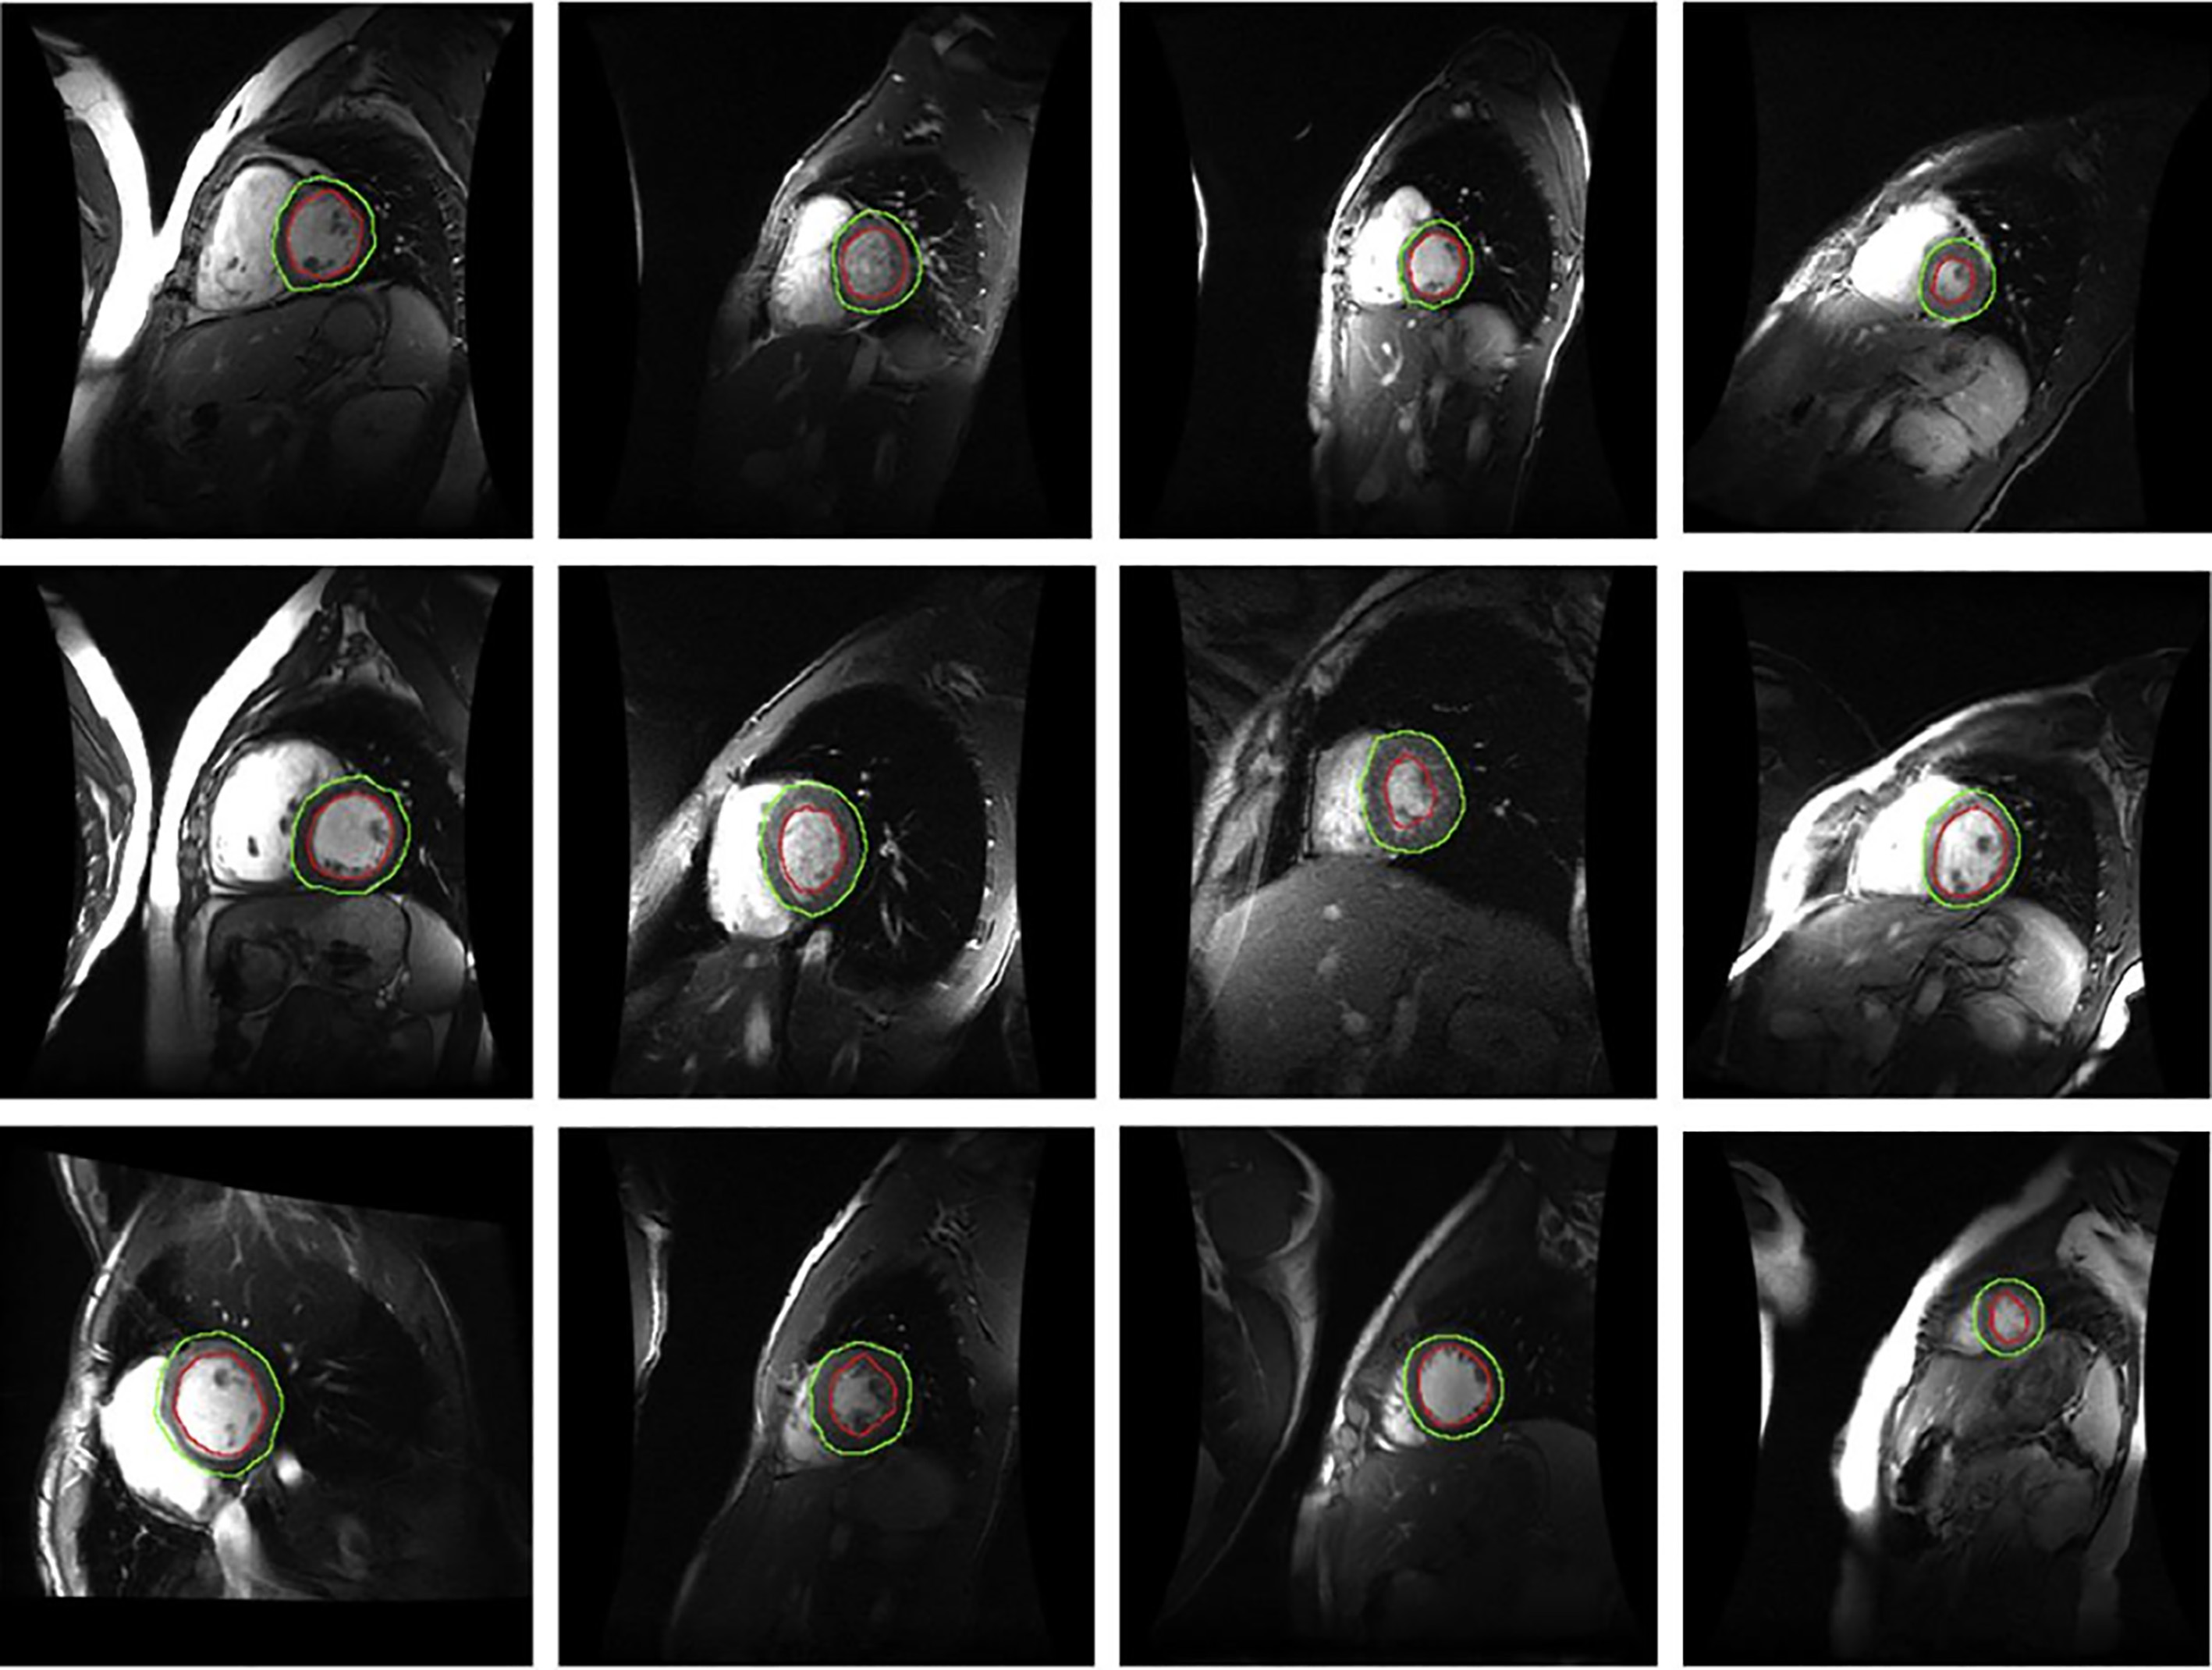 Location results of key regions found in the remaining 24 cardiac MRI images.